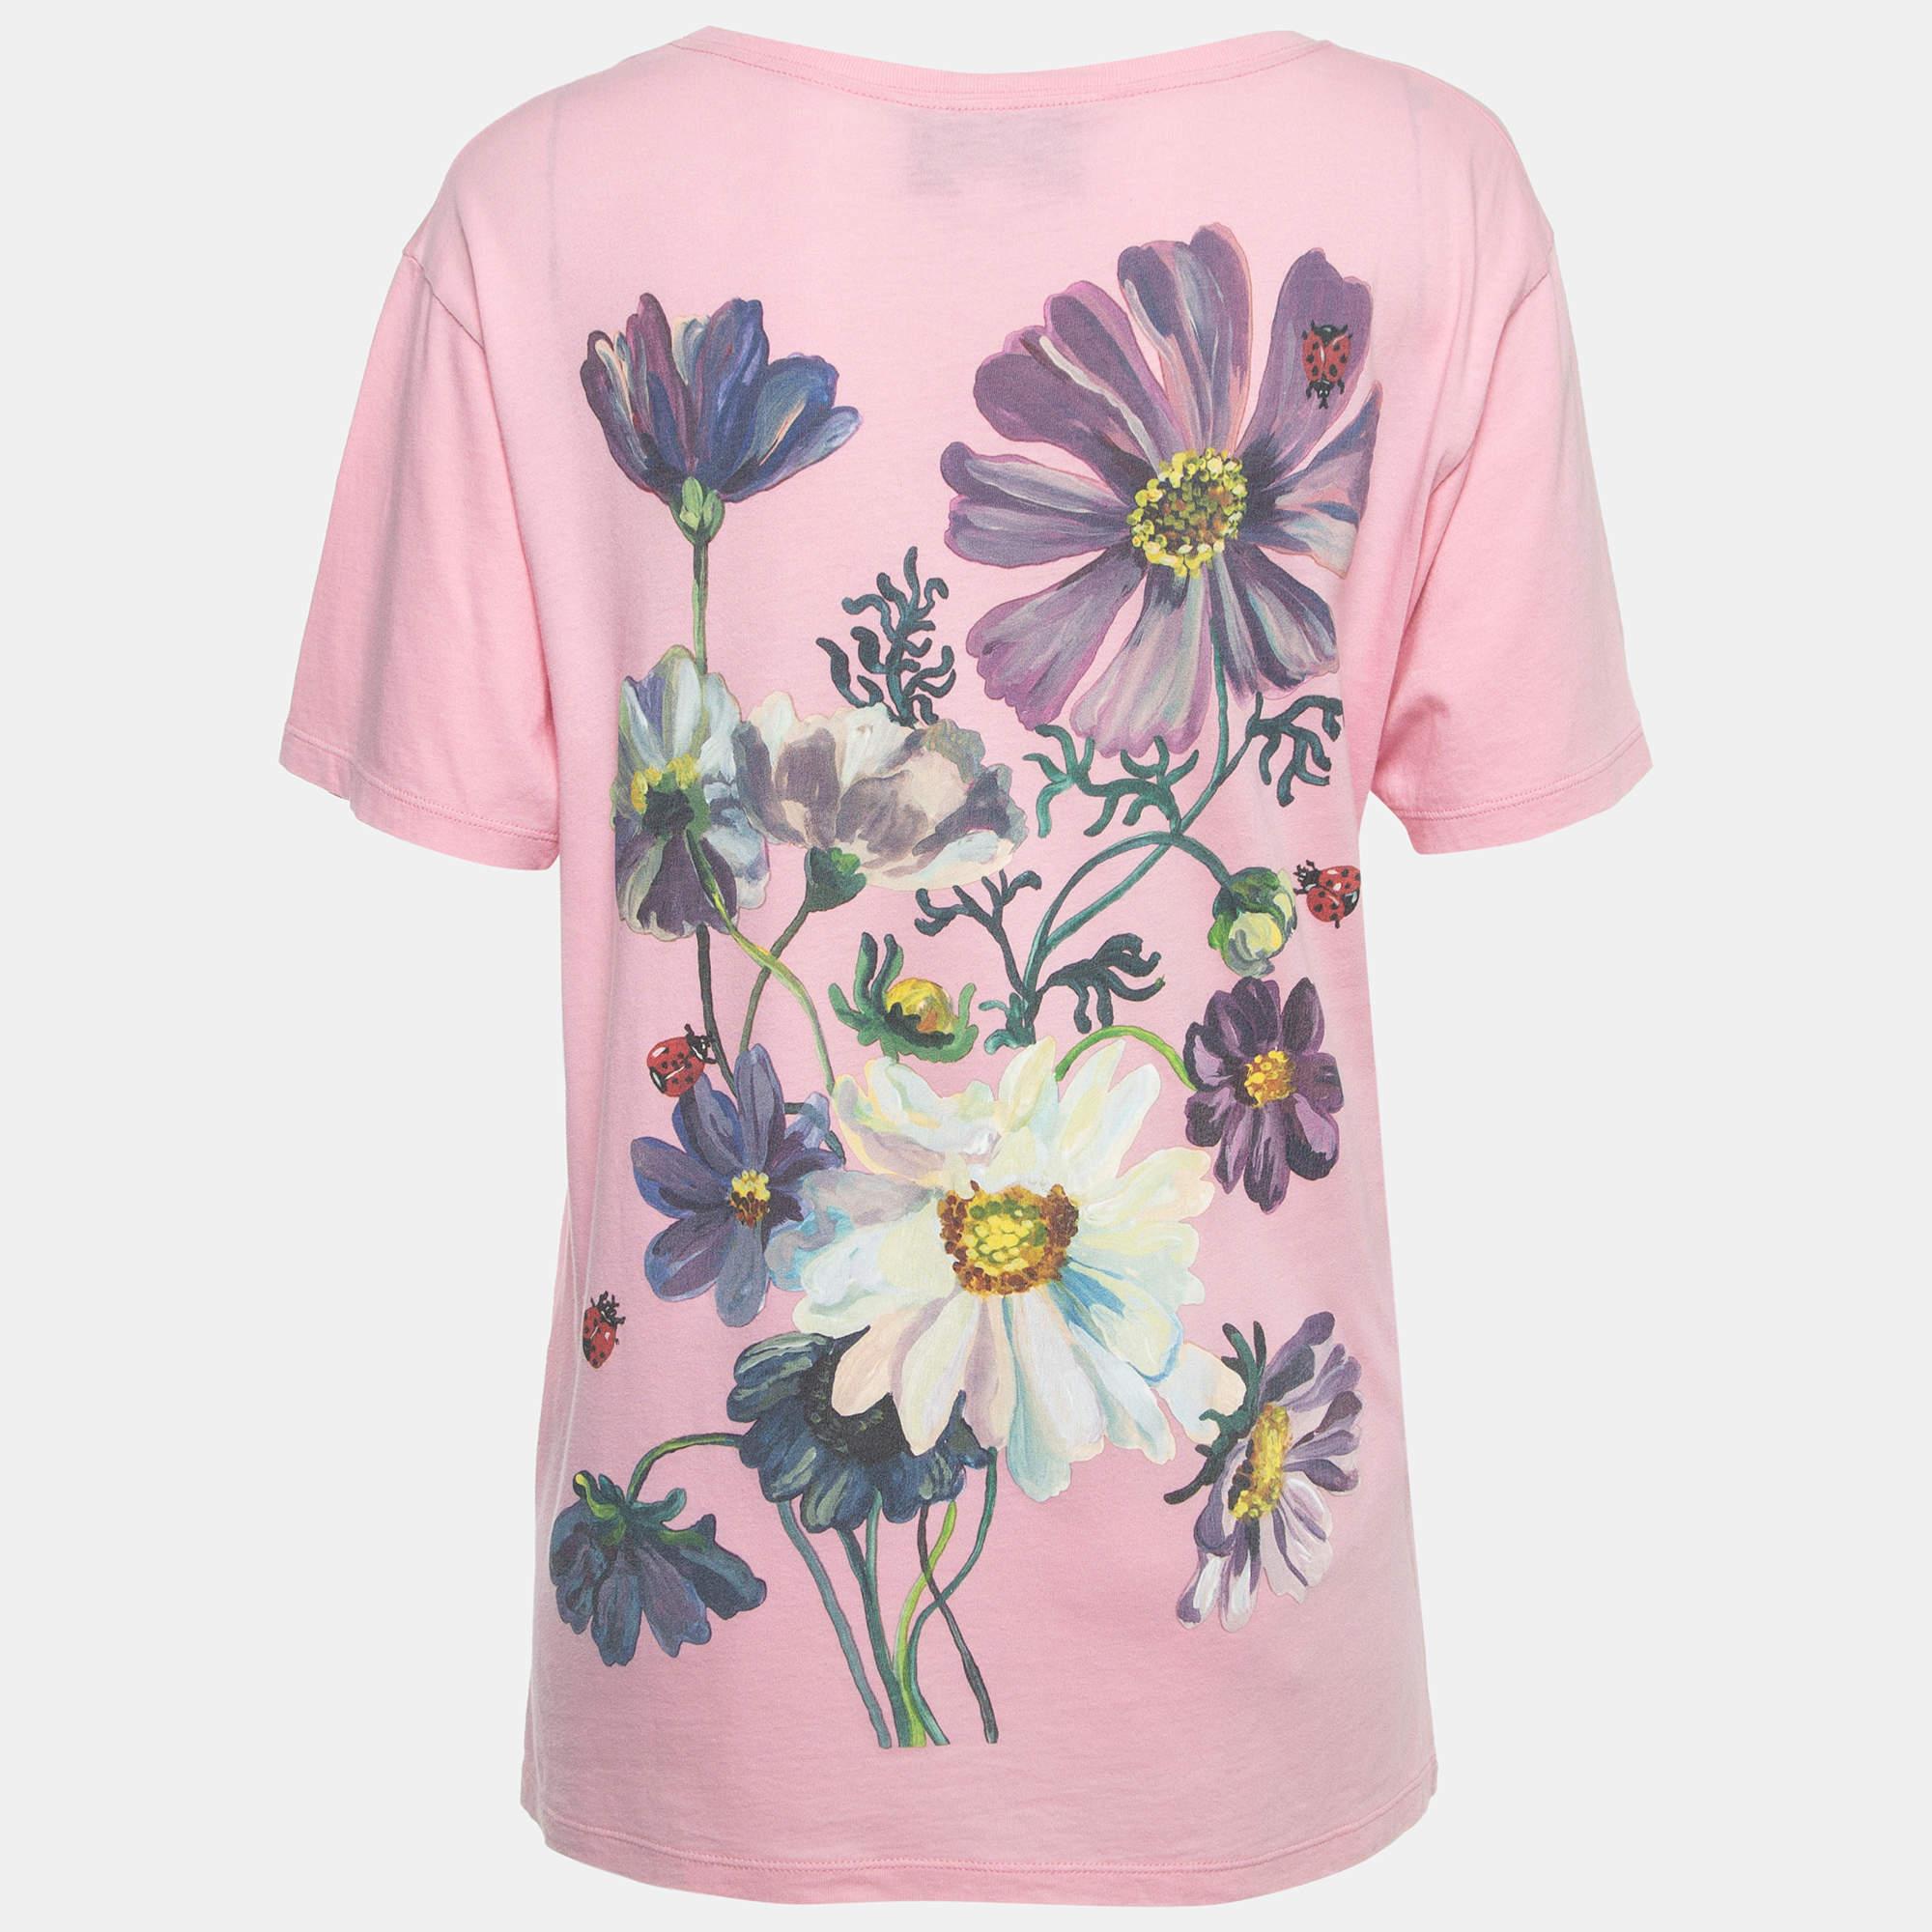 Choose all-day comfort with this Gucci T-shirt. The pink T-shirt, featuring a round neckline, logo & deer print, and short sleeves, guarantees quality and simple style.

